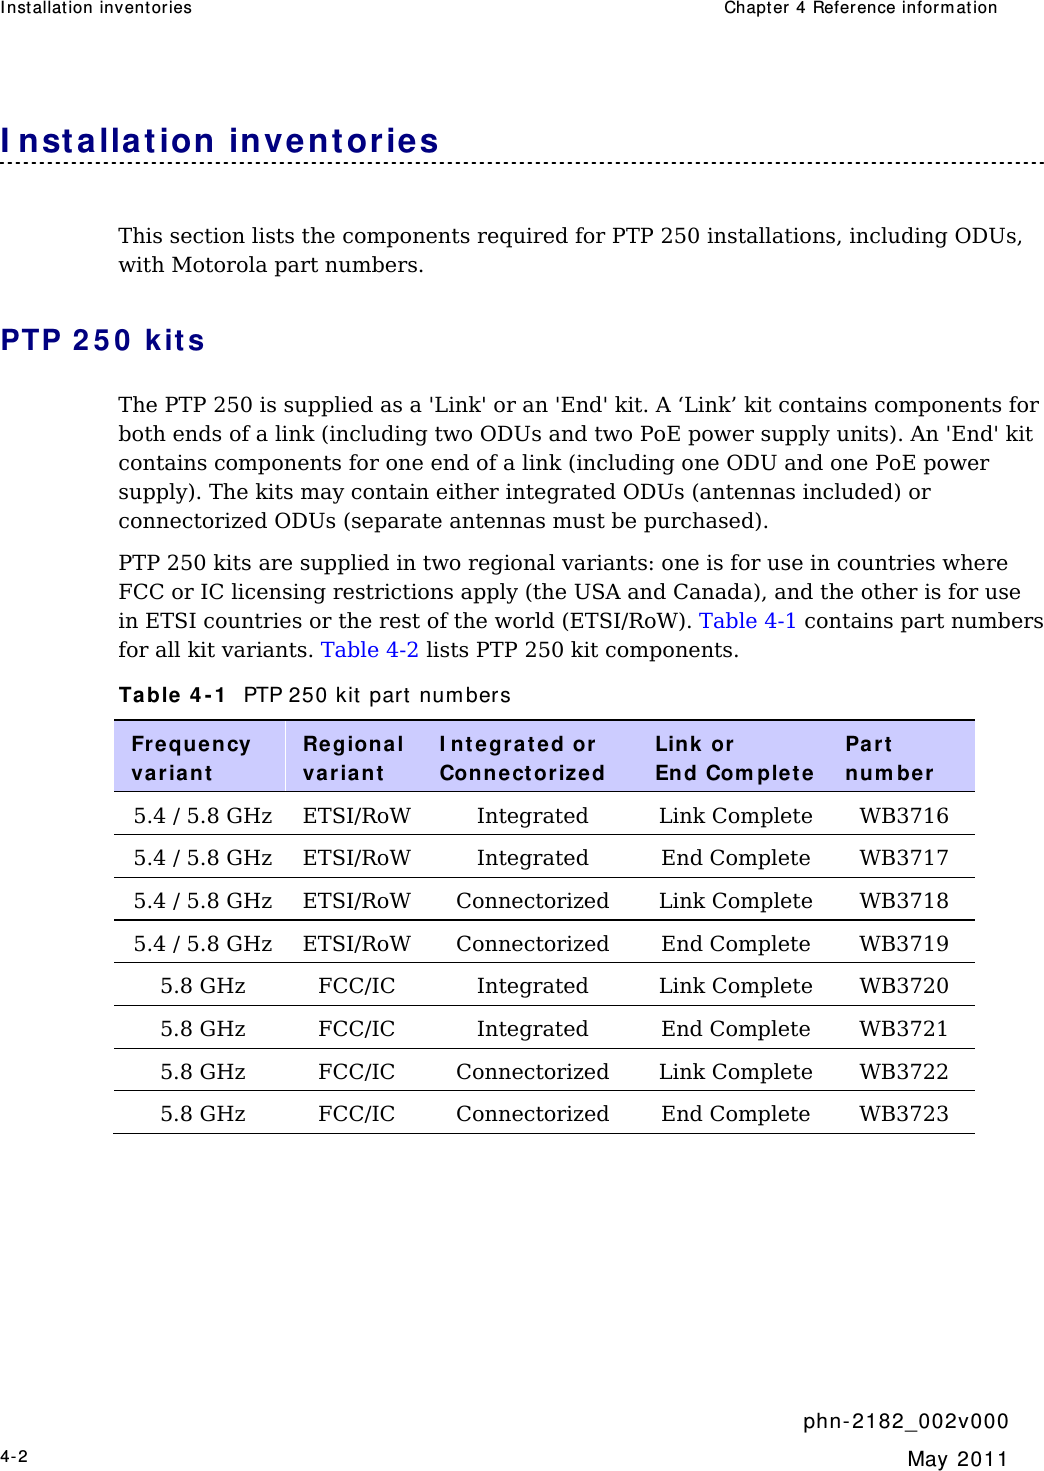 I nst allation inventor ies  Chapt er 4 Reference inform at ion     phn- 2 182_002v 000 4-2  May 2011  I nst allat ion invent ories This section lists the components required for PTP 250 installations, including ODUs, with Motorola part numbers. PTP 2 5 0  kit s The PTP 250 is supplied as a &apos;Link&apos; or an &apos;End&apos; kit. A ‘Link’ kit contains components for both ends of a link (including two ODUs and two PoE power supply units). An &apos;End&apos; kit contains components for one end of a link (including one ODU and one PoE power supply). The kits may contain either integrated ODUs (antennas included) or connectorized ODUs (separate antennas must be purchased). PTP 250 kits are supplied in two regional variants: one is for use in countries where FCC or IC licensing restrictions apply (the USA and Canada), and the other is for use in ETSI countries or the rest of the world (ETSI/RoW). Table 4-1 contains part numbers for all kit variants. Table 4-2 lists PTP 250 kit components. Table  4 - 1   PTP 250 kit part  num bers Fr eque ncy var iant  Regional var iant  I nt e gra t ed or  Conne ct or ize d Link  or End Com plet e  Part  num ber  5.4 / 5.8 GHz  ETSI/RoW Integrated Link Complete WB3716 5.4 / 5.8 GHz  ETSI/RoW Integrated End Complete WB3717 5.4 / 5.8 GHz  ETSI/RoW Connectorized Link Complete WB3718 5.4 / 5.8 GHz  ETSI/RoW Connectorized End Complete WB3719 5.8 GHz  FCC/IC  Integrated Link Complete WB3720 5.8 GHz  FCC/IC  Integrated End Complete WB3721 5.8 GHz  FCC/IC  Connectorized Link Complete WB3722 5.8 GHz  FCC/IC  Connectorized End Complete WB3723  